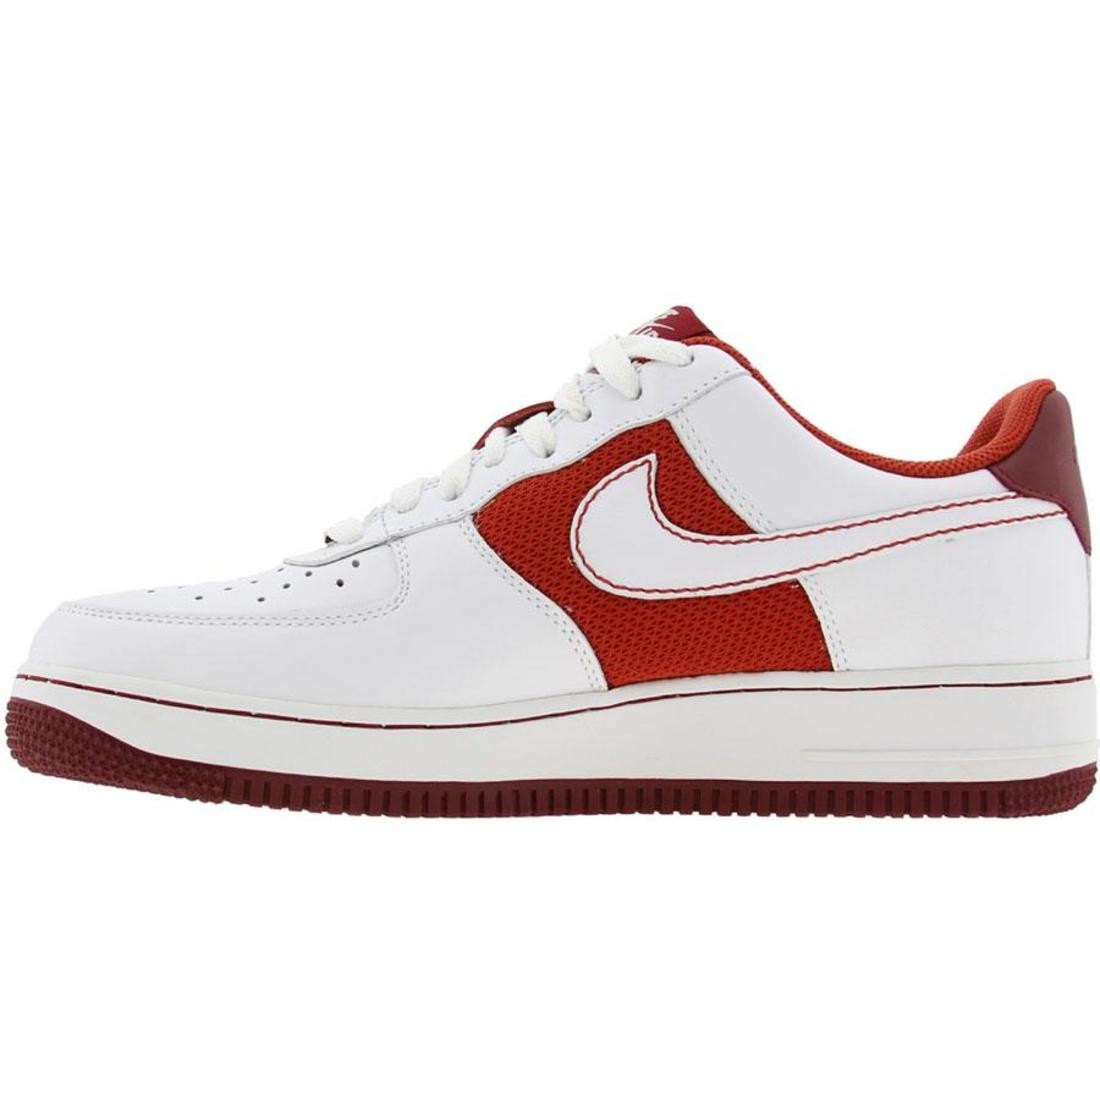 Nike Air Force 1 07 Low Baltimore City Series - Cloverdale Park 58th Street (terra cotta / white / team red)